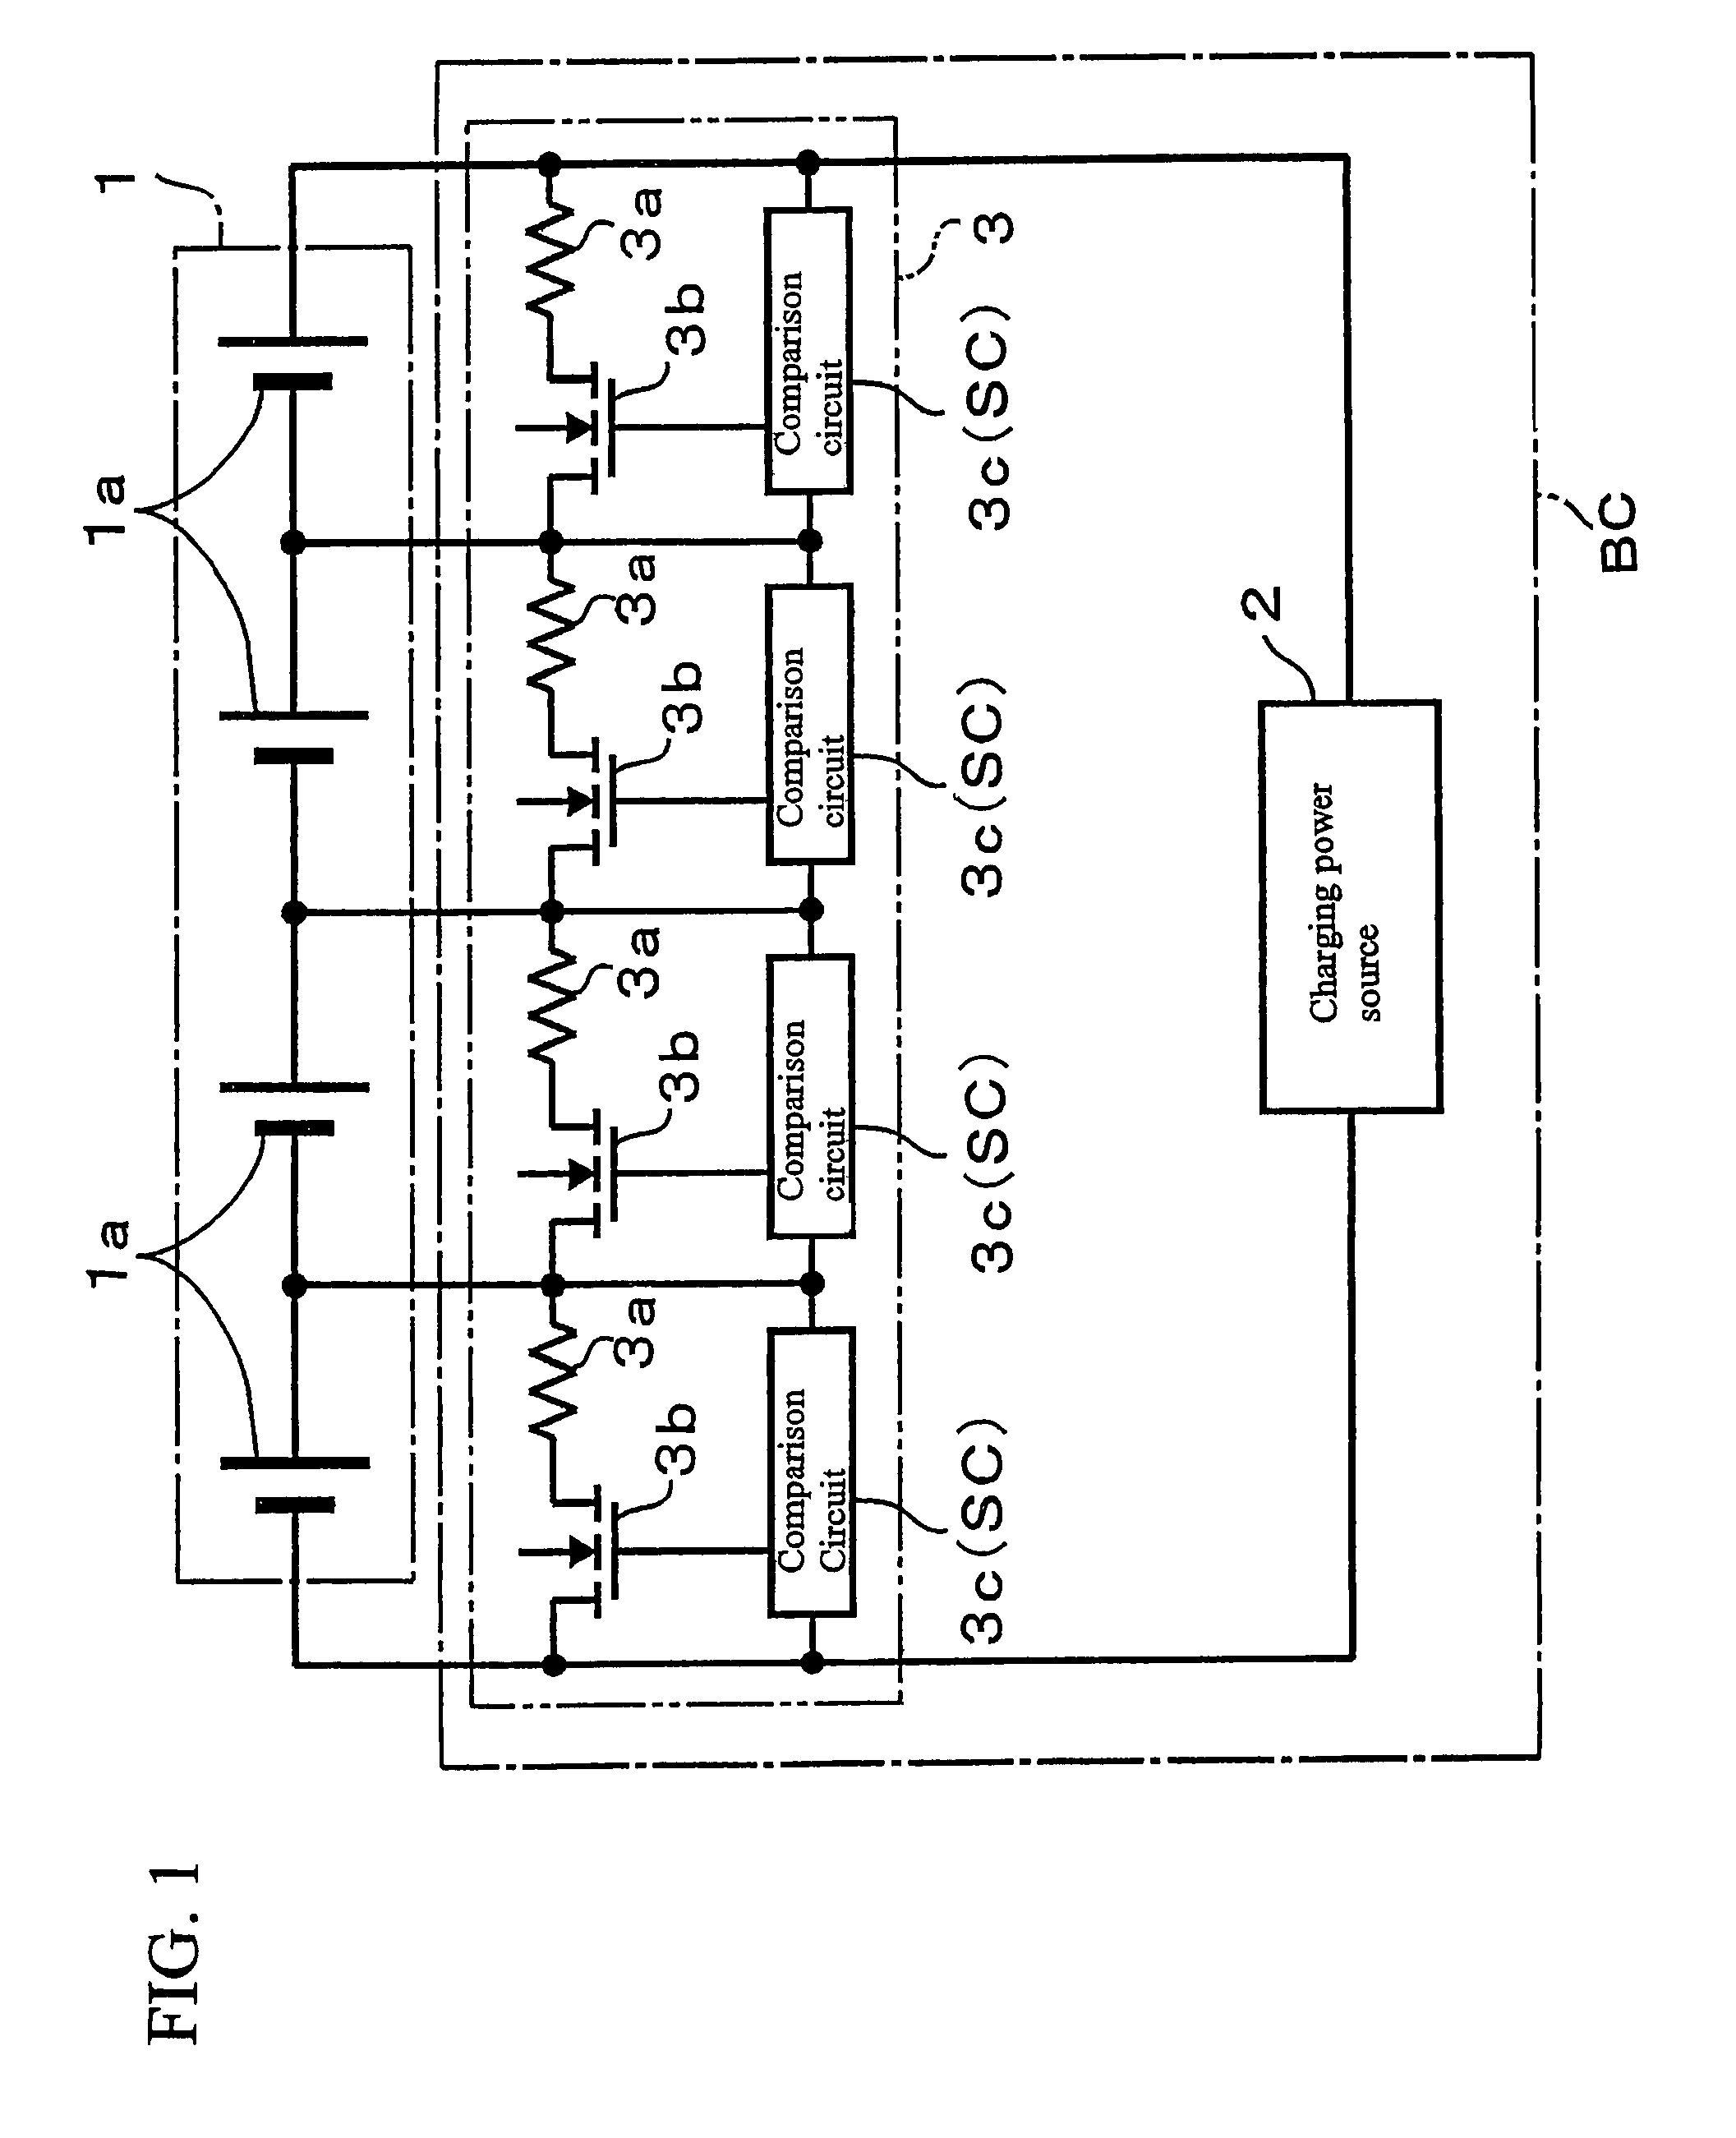 Device for balancing cell voltage for a secondary battery